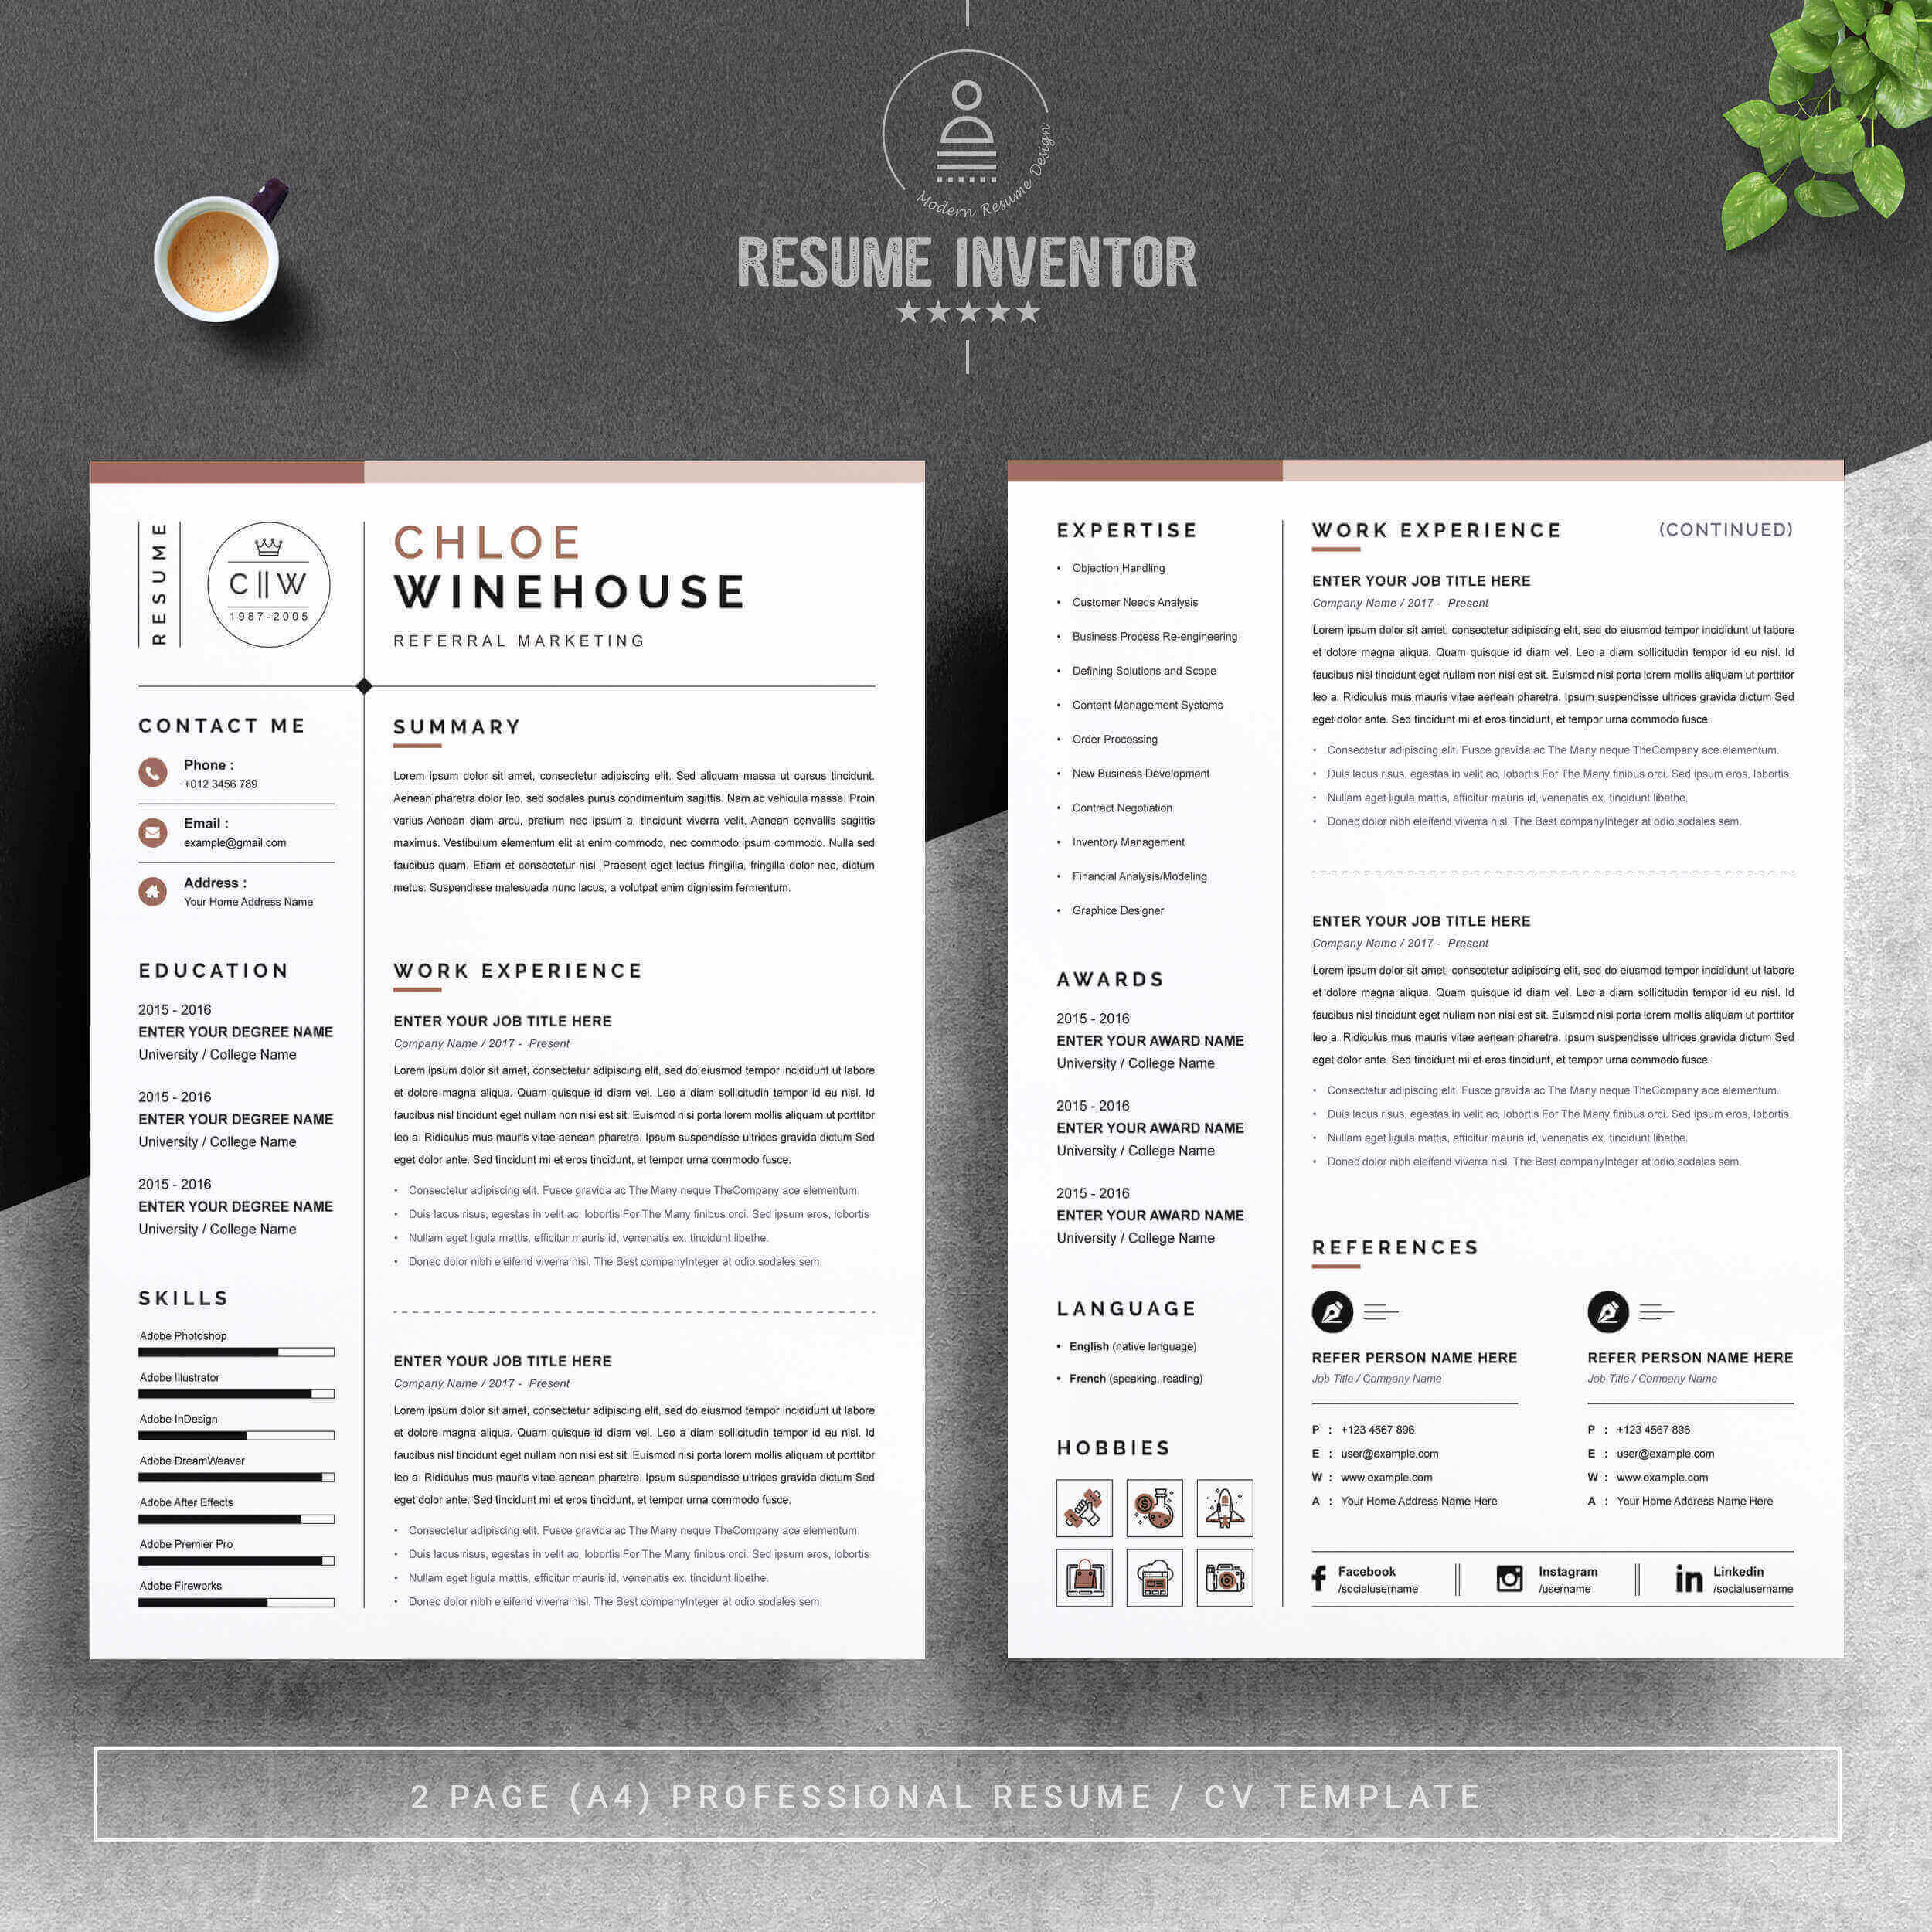 Referral Marketing Resume CV Template | Professional CV Template preview image.